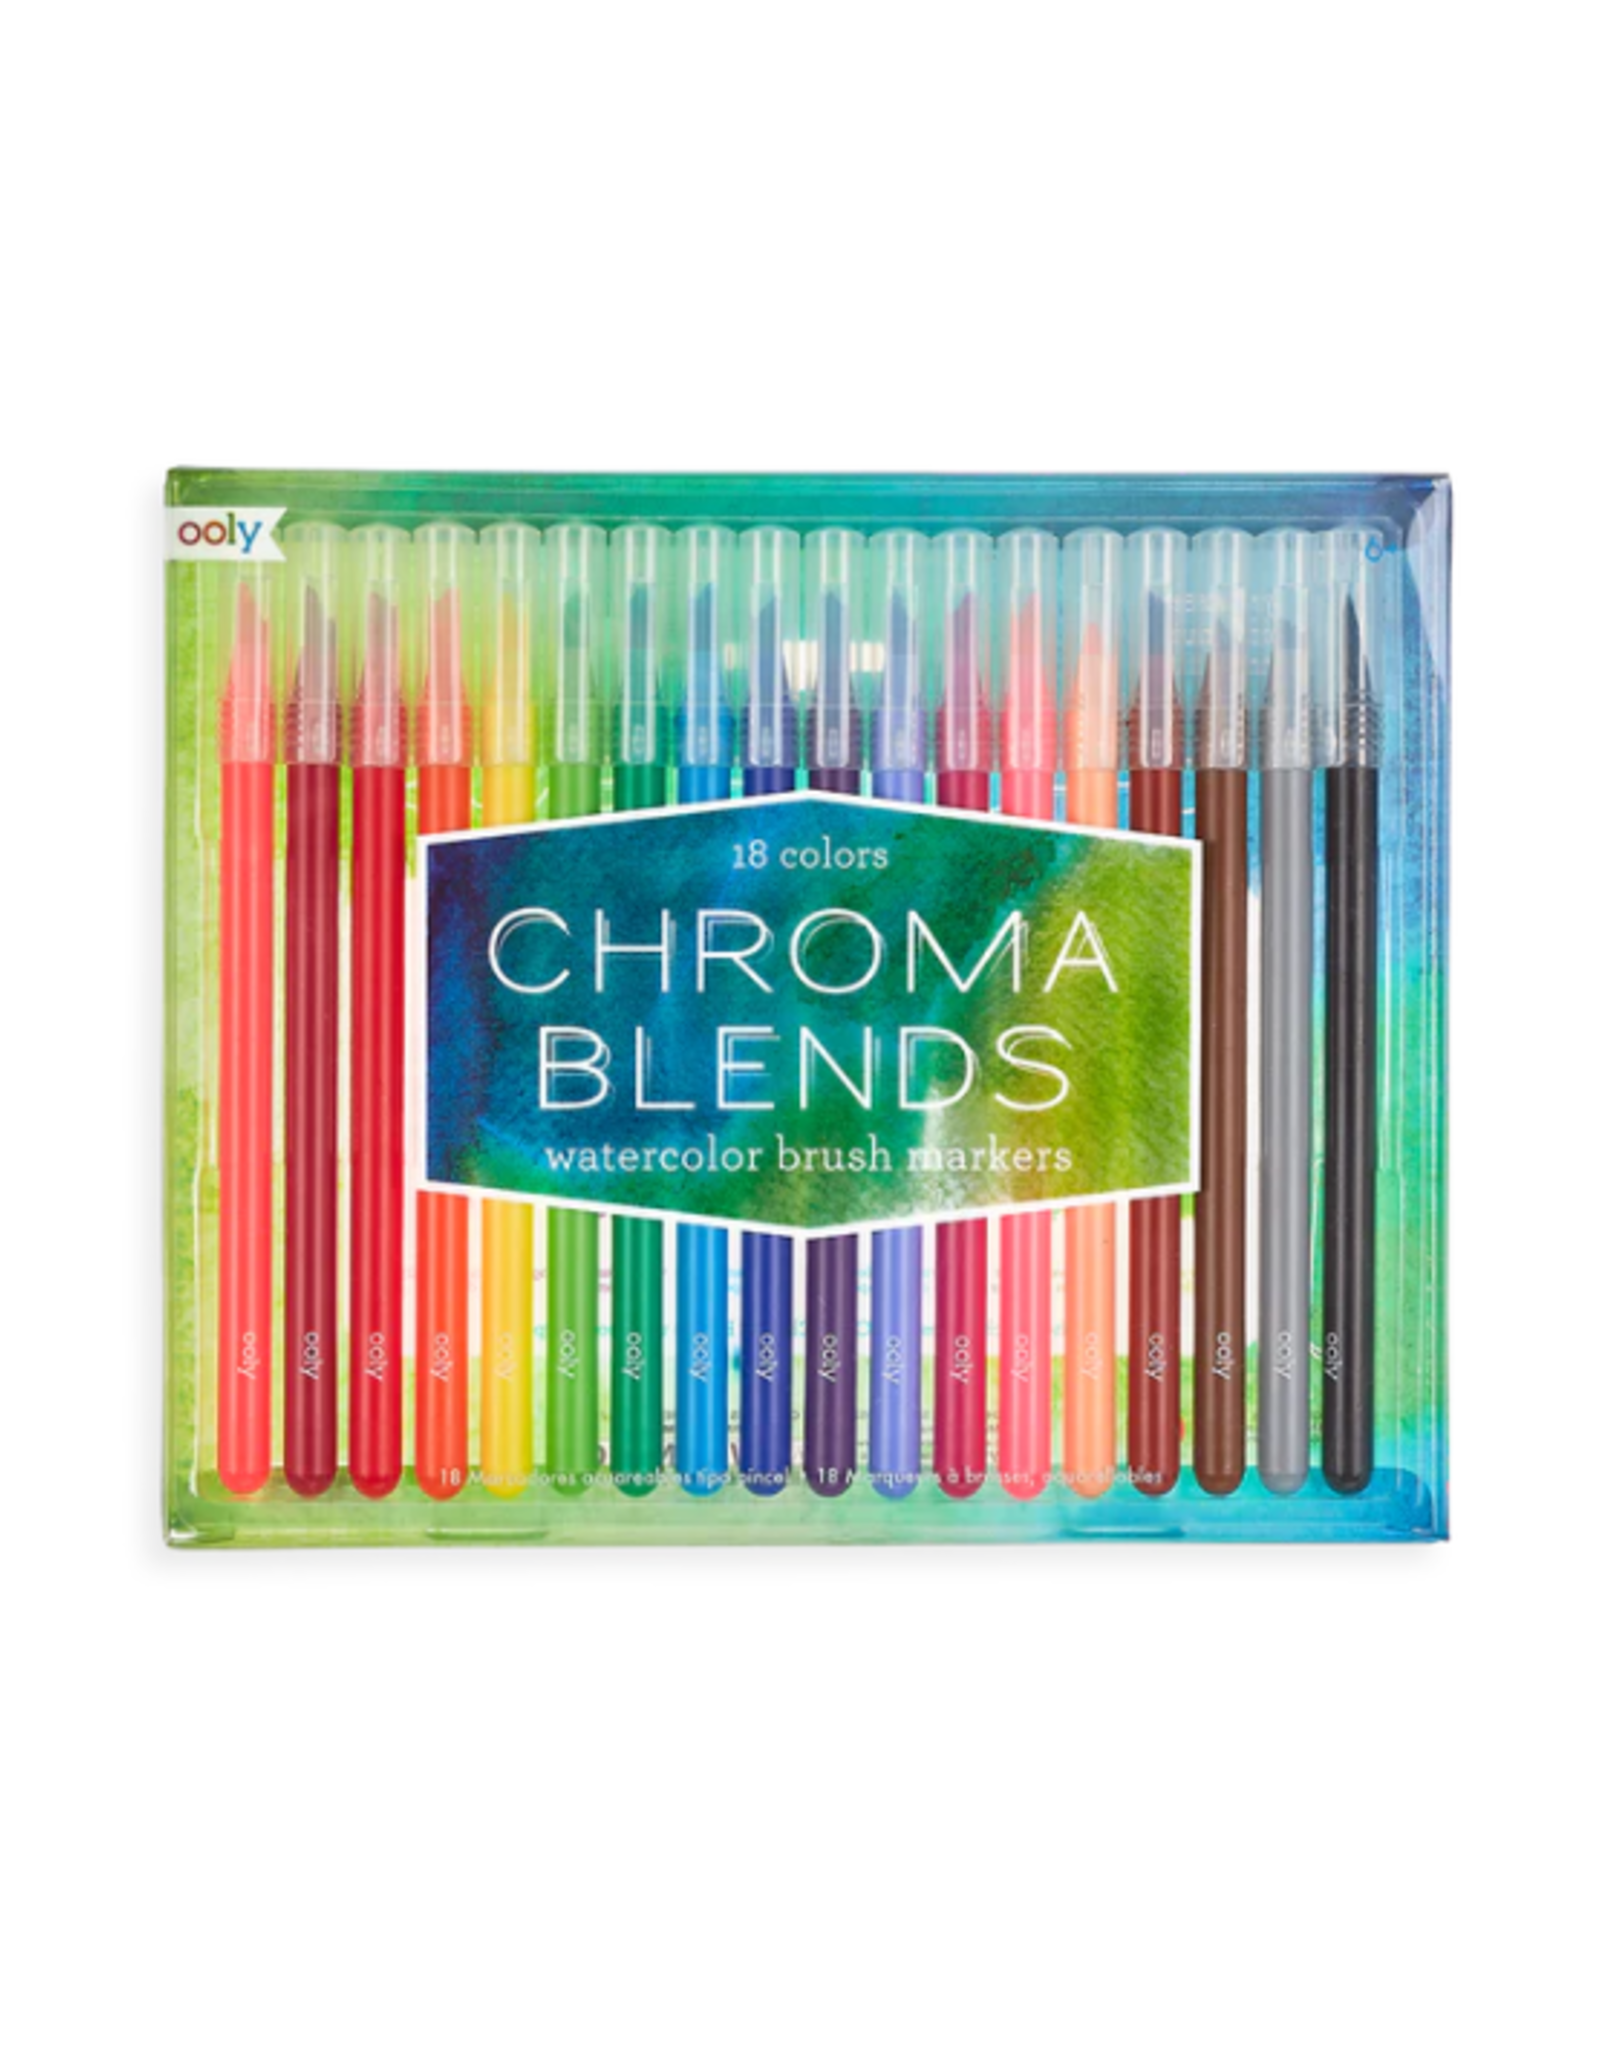 Ooly Ooly - Chroma Blends Watercolor Brush Markers